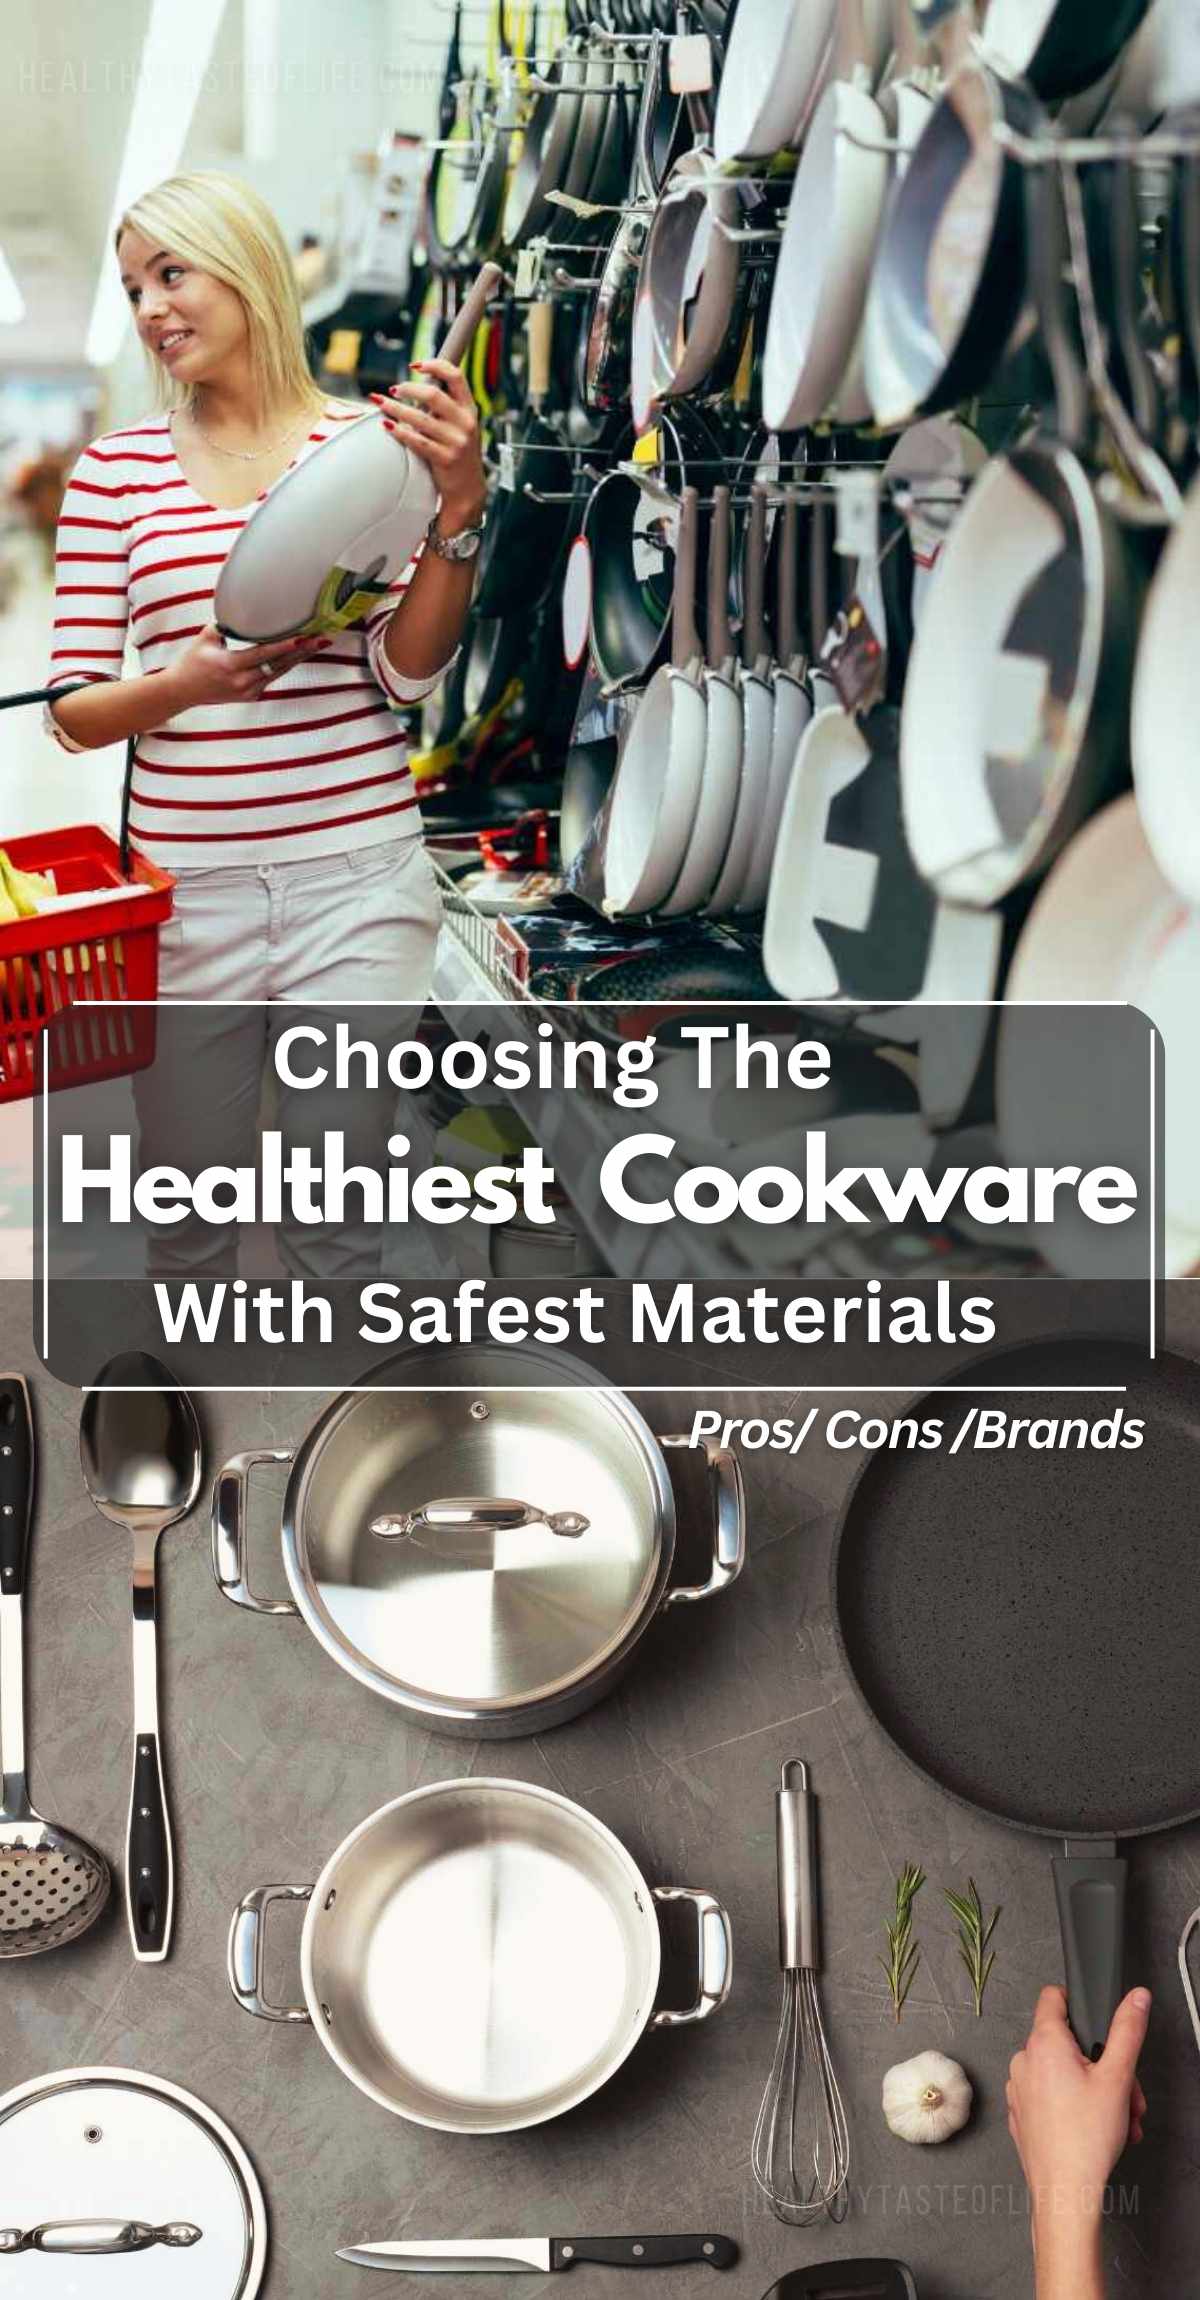 Choosing the healthiest and safest cookware is a pivotal step in your health journey. Delve into the world of healthy cookware, understanding the pros and cons of various safe materials used in cookware brands. With an array of non-toxic product options, it's essential to be informed. Explore top cookware brands and equip your kitchen with the best safe cookware!   #HealthyCookware #NonToxic #SafeMaterials #CookwareBrands #ProsAndCons #HealthJourney #cookware